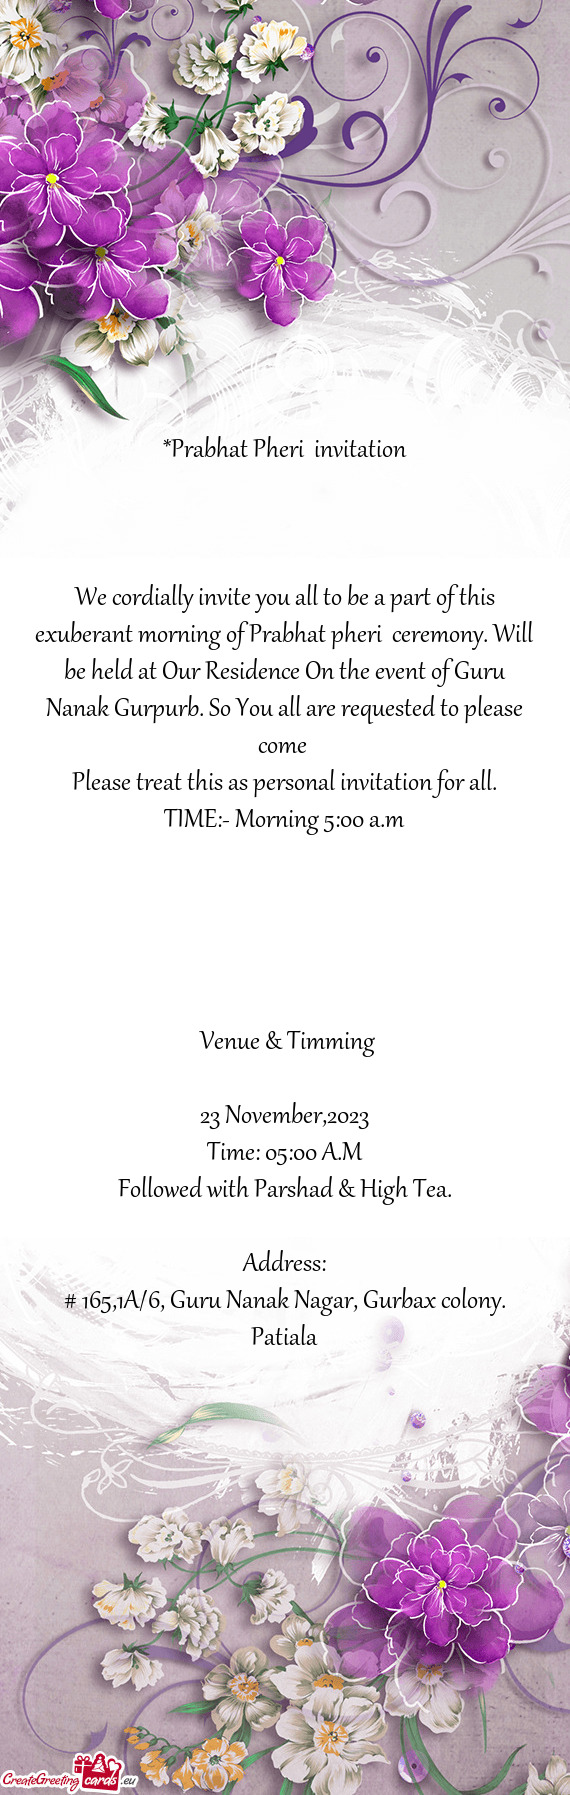 Be held at Our Residence On the event of Guru Nanak Gurpurb. So You all are requested to please come